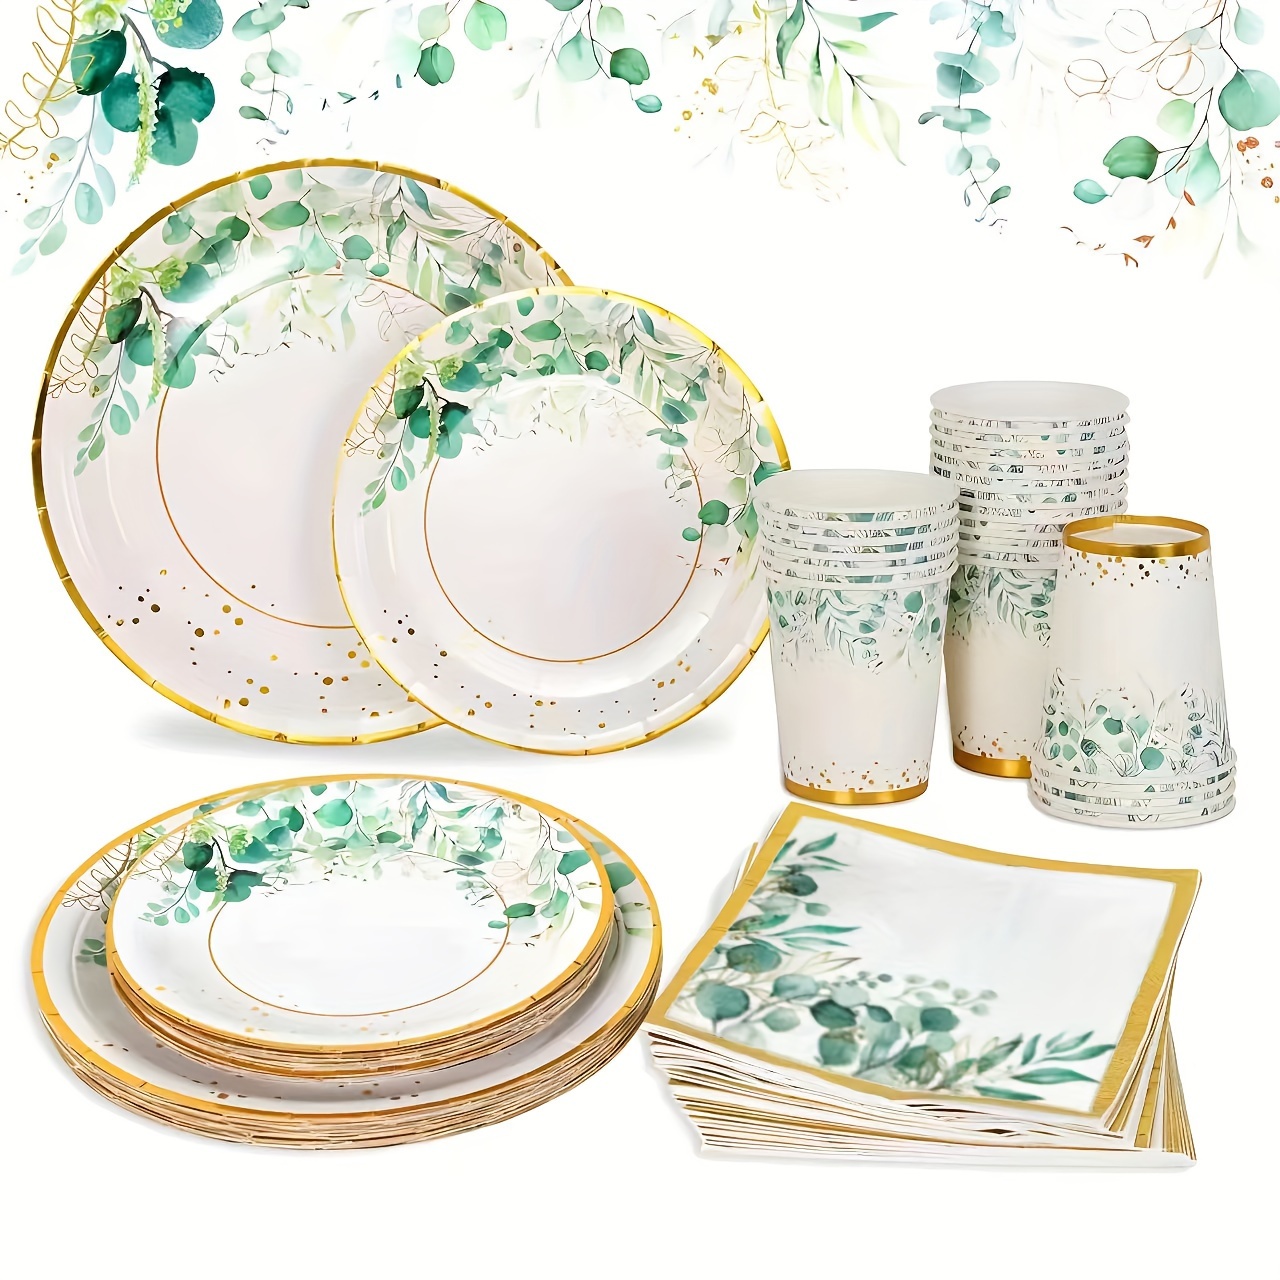 

96-piece Sage Green Party Supplies Set - Disposable Plates, Cups & Napkins For Weddings, Baby Showers, Birthdays & Celebrations